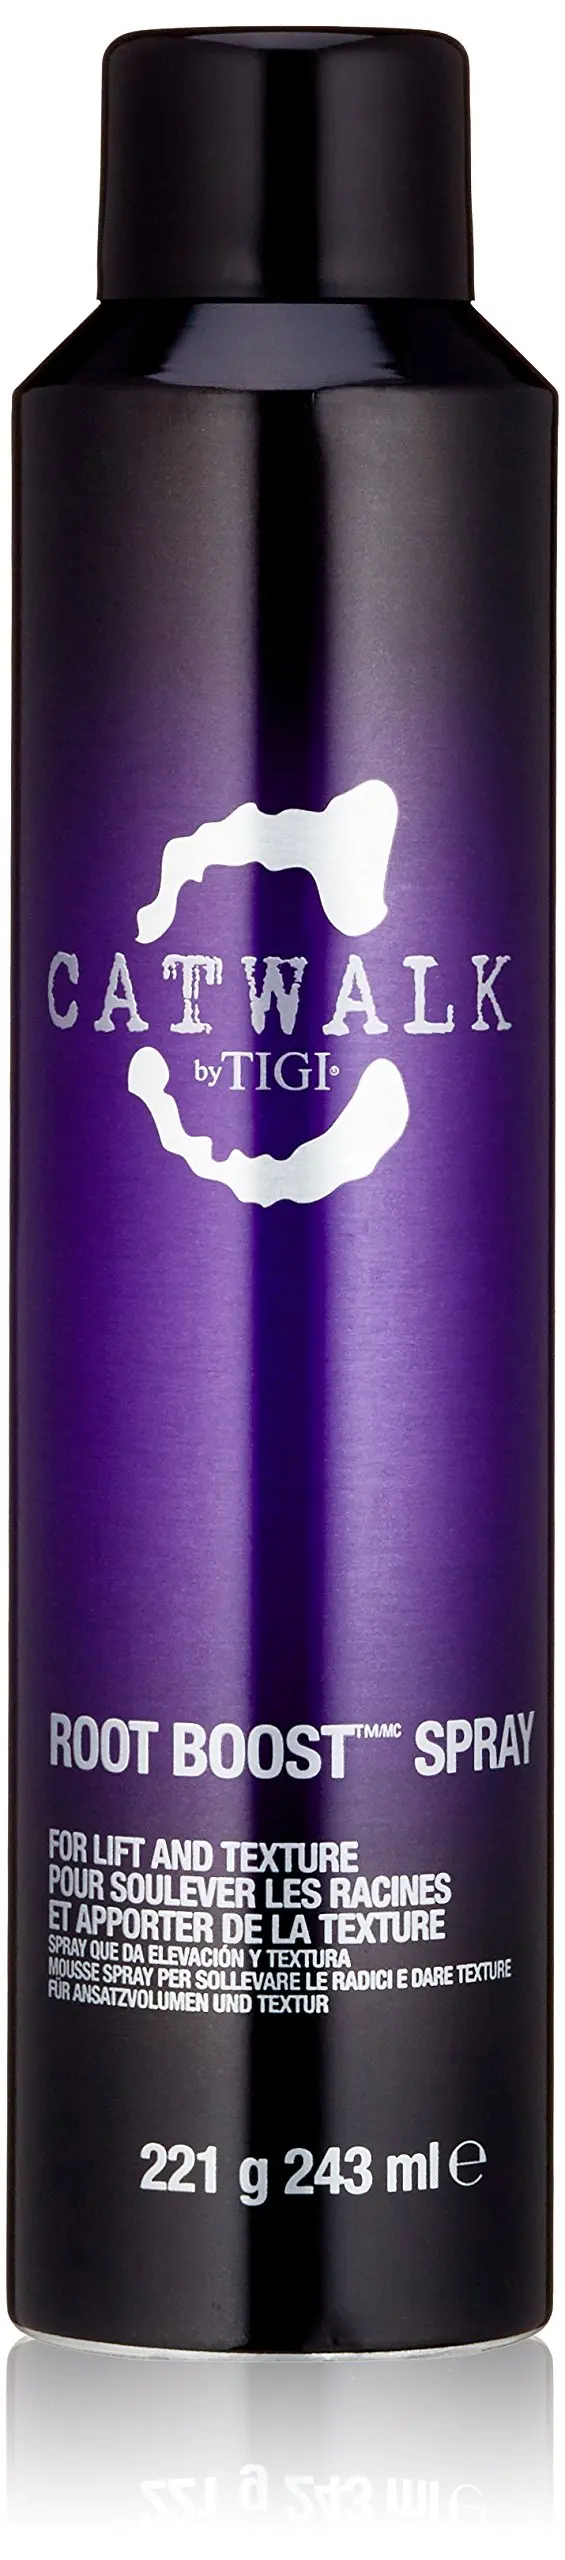 Catwalk by Tigi Root Boost Spray for Lift and Texture 243 ml.